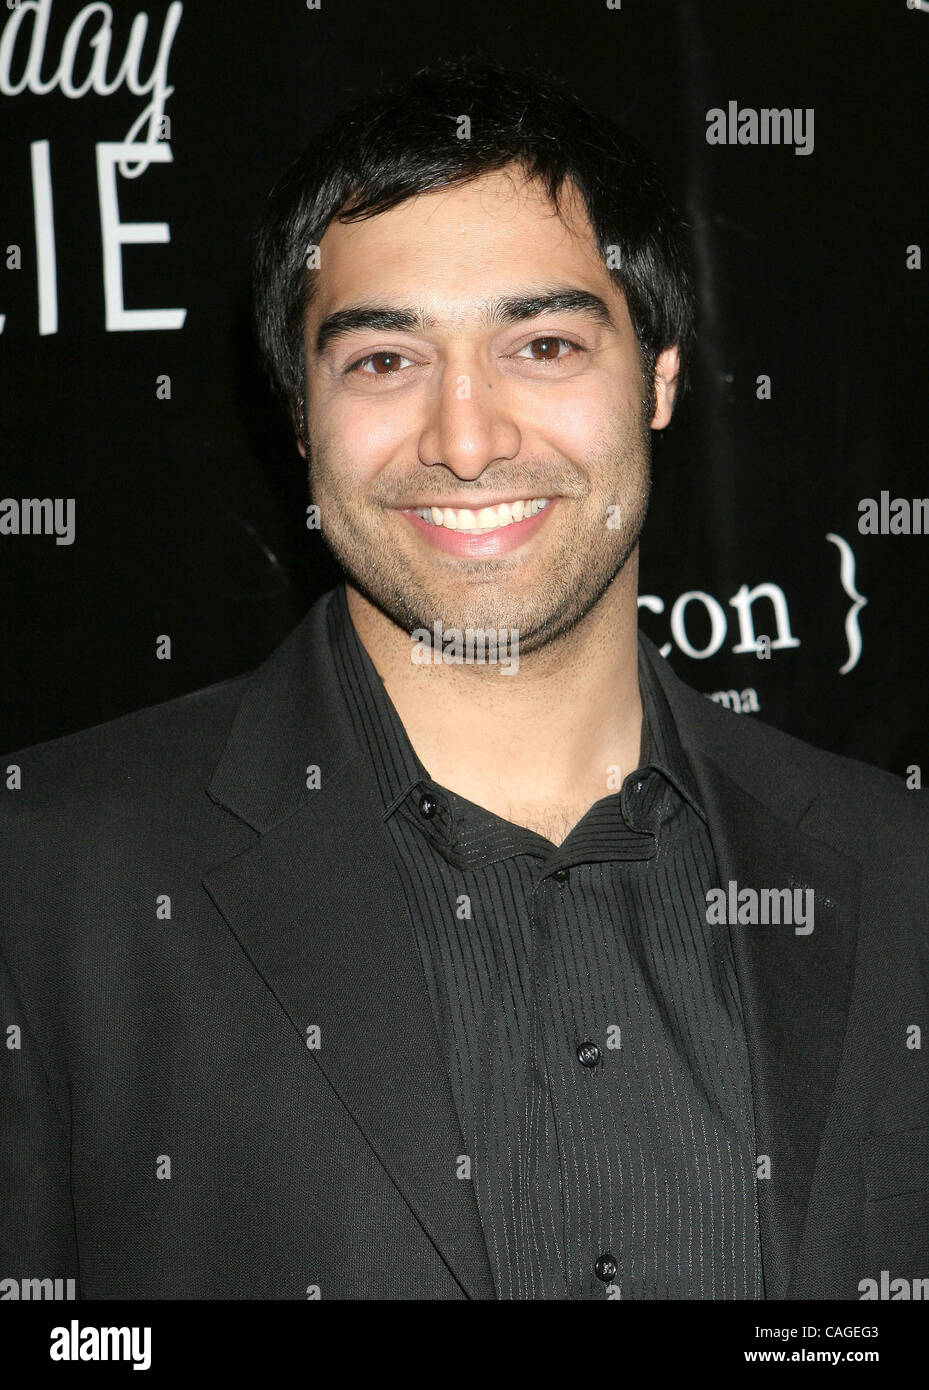 Feb 07, 2008; Hollywood, CA, USA; Actor AMOL SHAH at the 'Yesterday Was ...